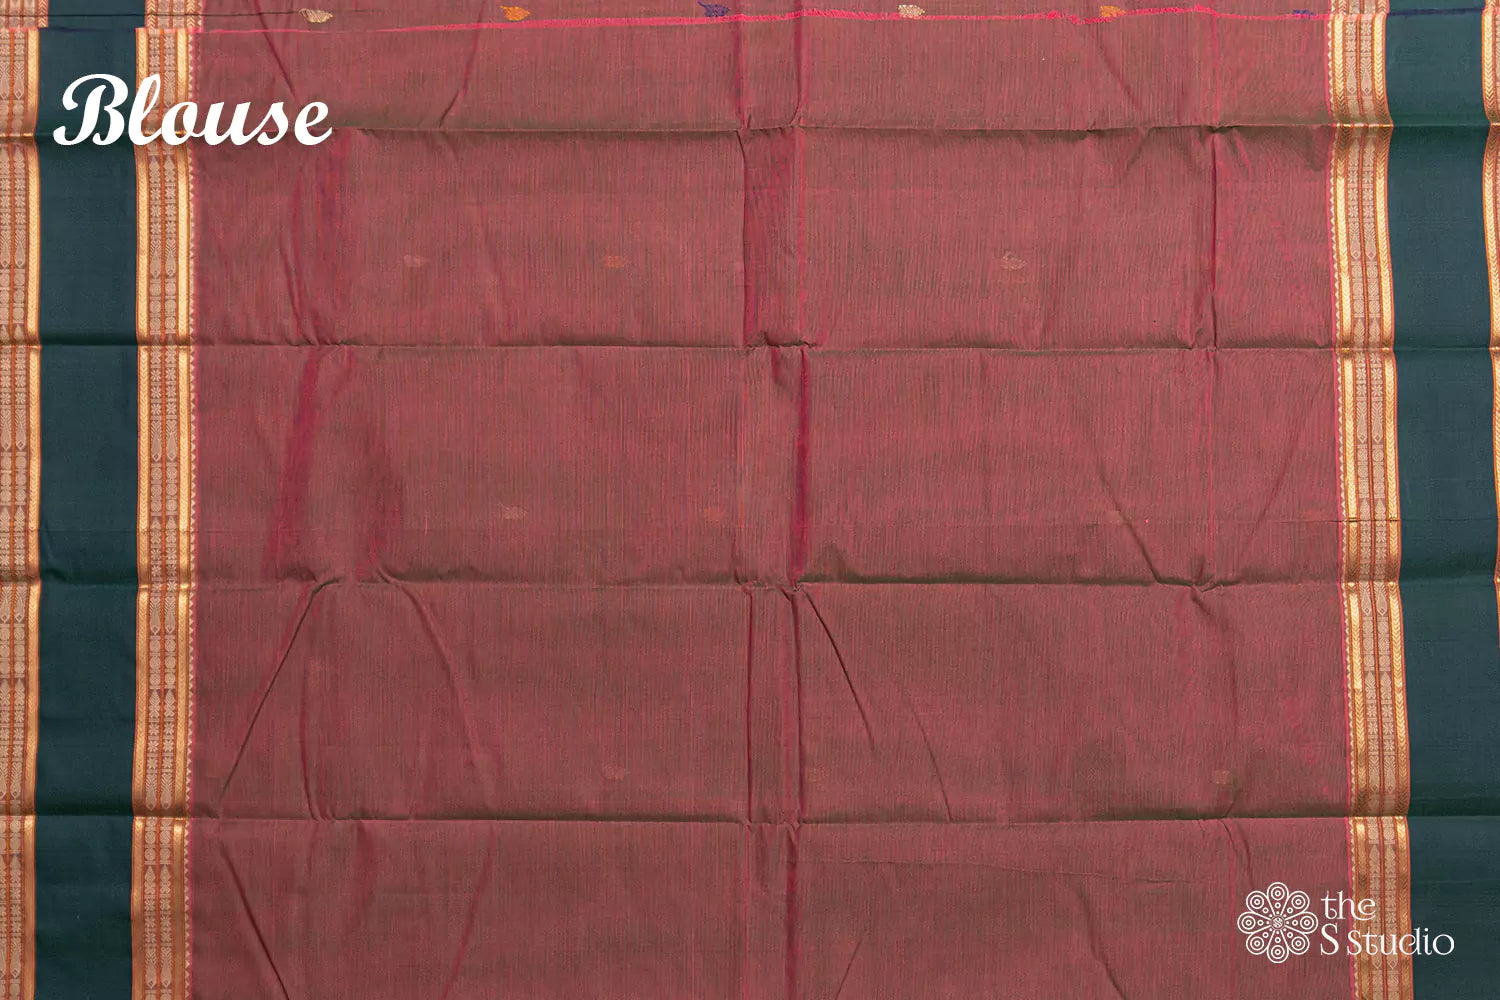 Mauve Pink Kanchi Cotton Saree With Contrast Border And Thread Worked Pallu
